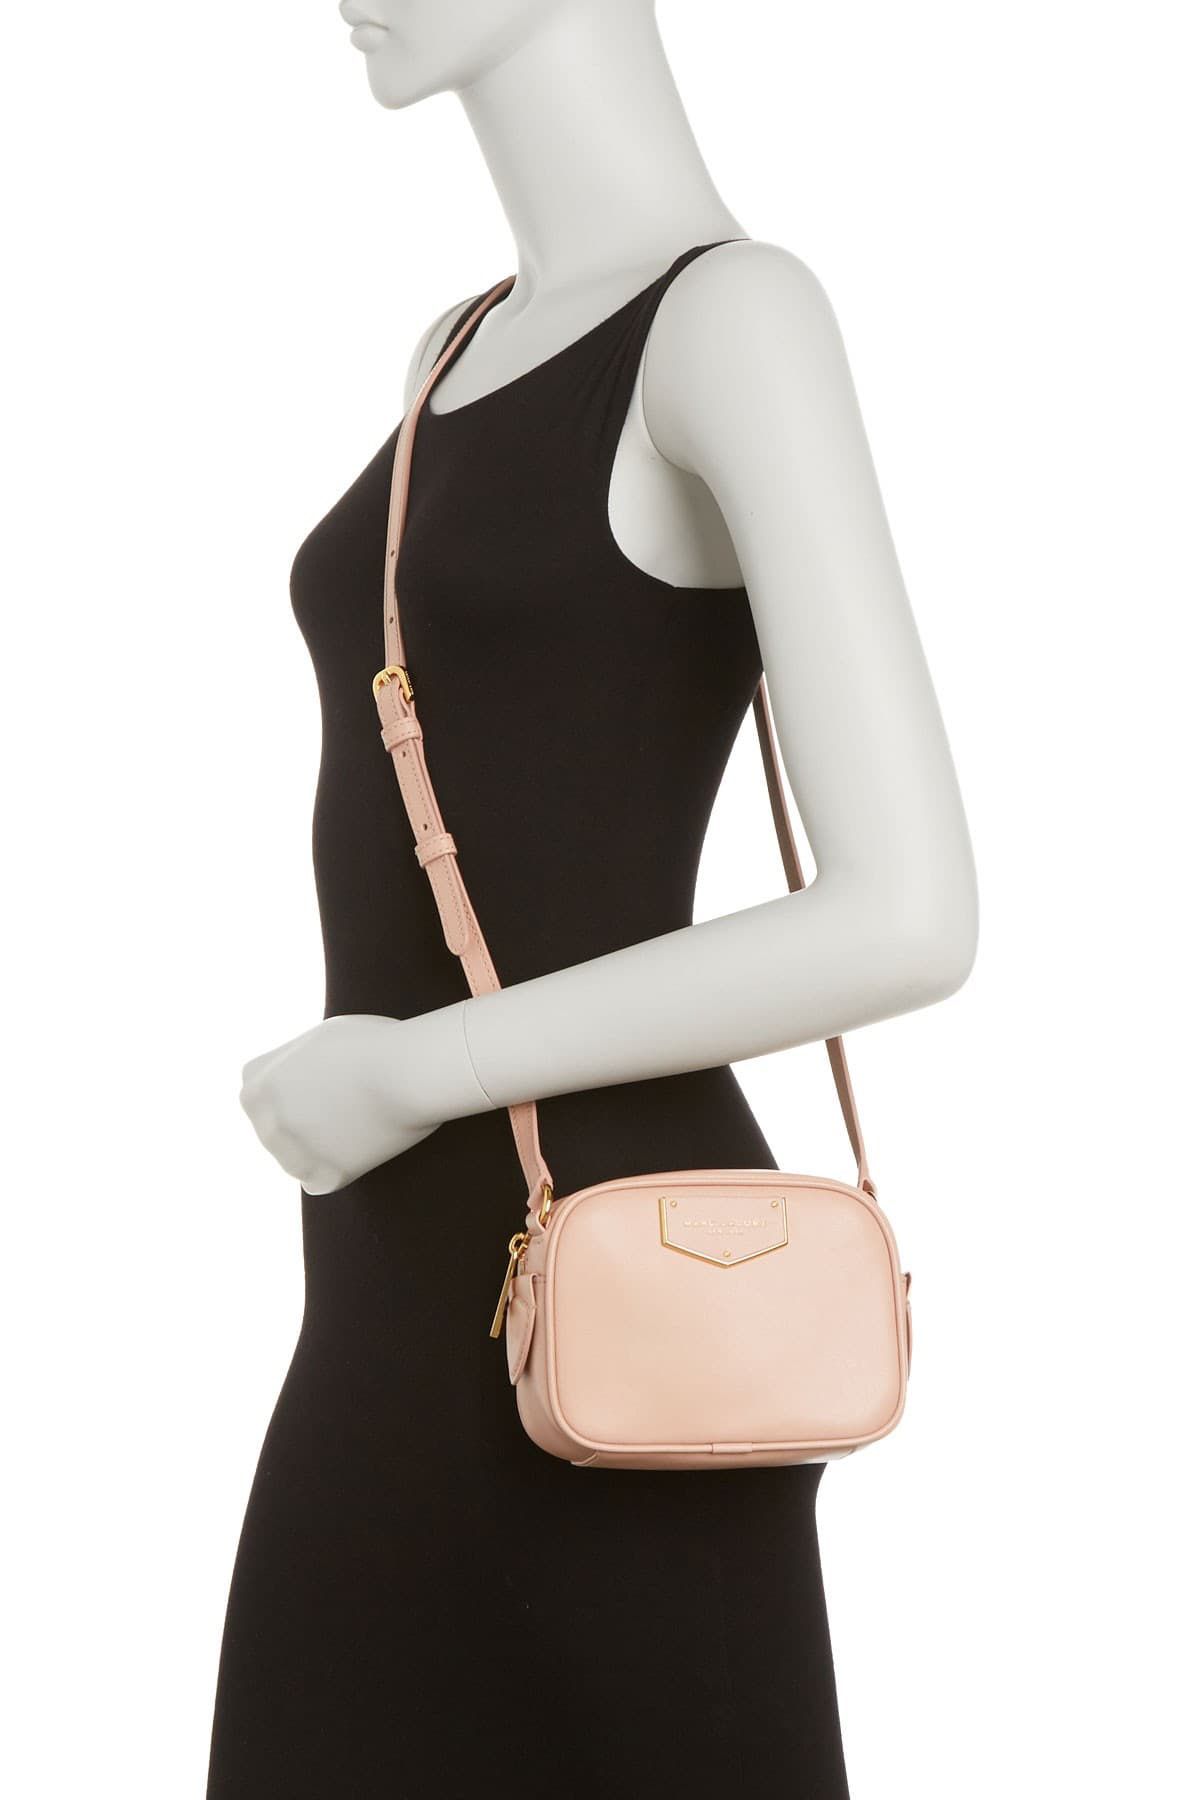 NWT Marc Jacobs Voyager Square Leather Crossbody Bag Pink $298 